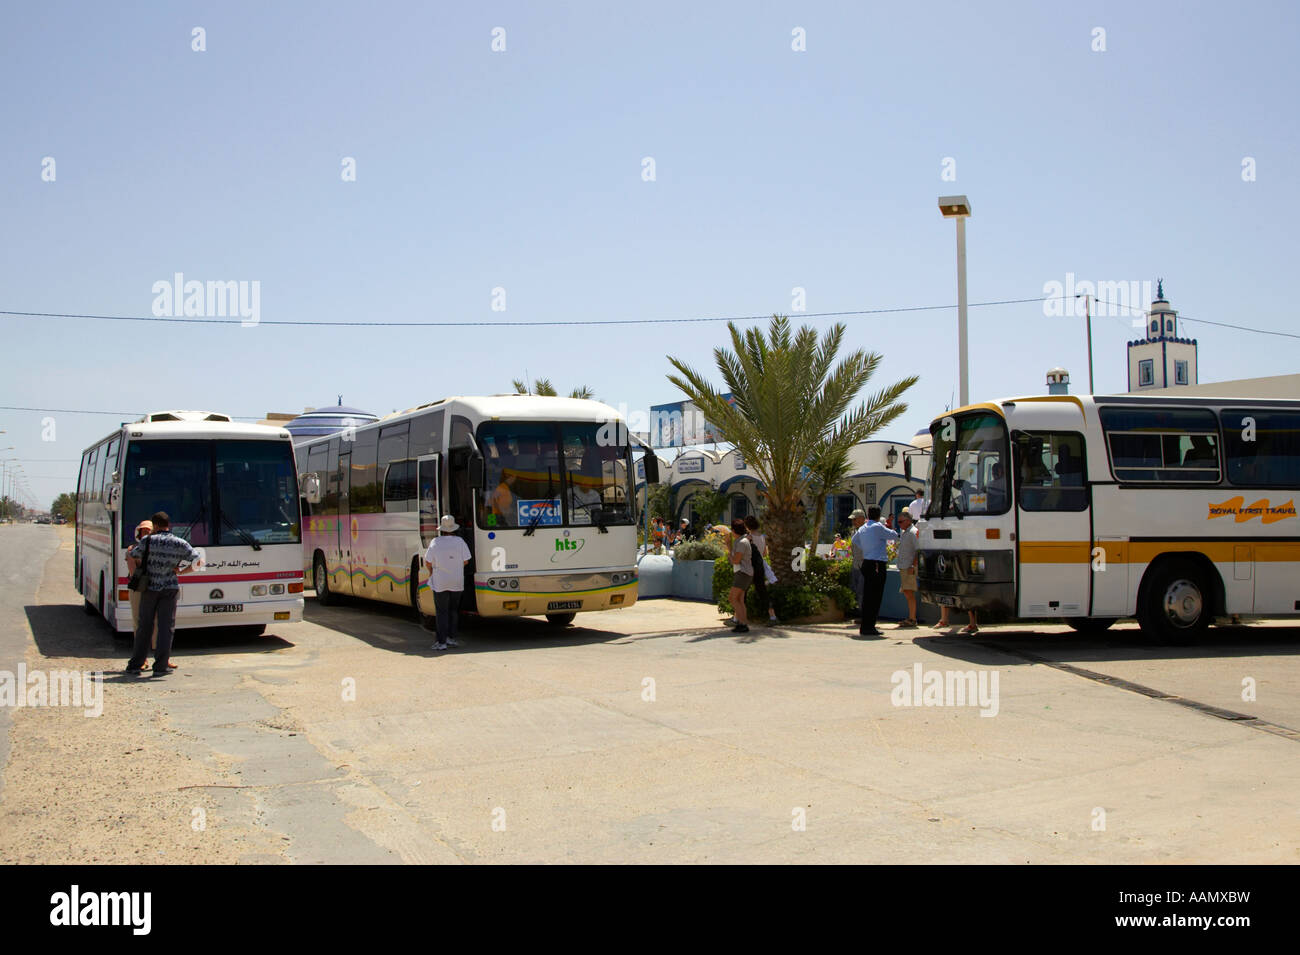 tourists get back on three tour busses parked after rest stop at the side of the highway in tunisia Stock Photo